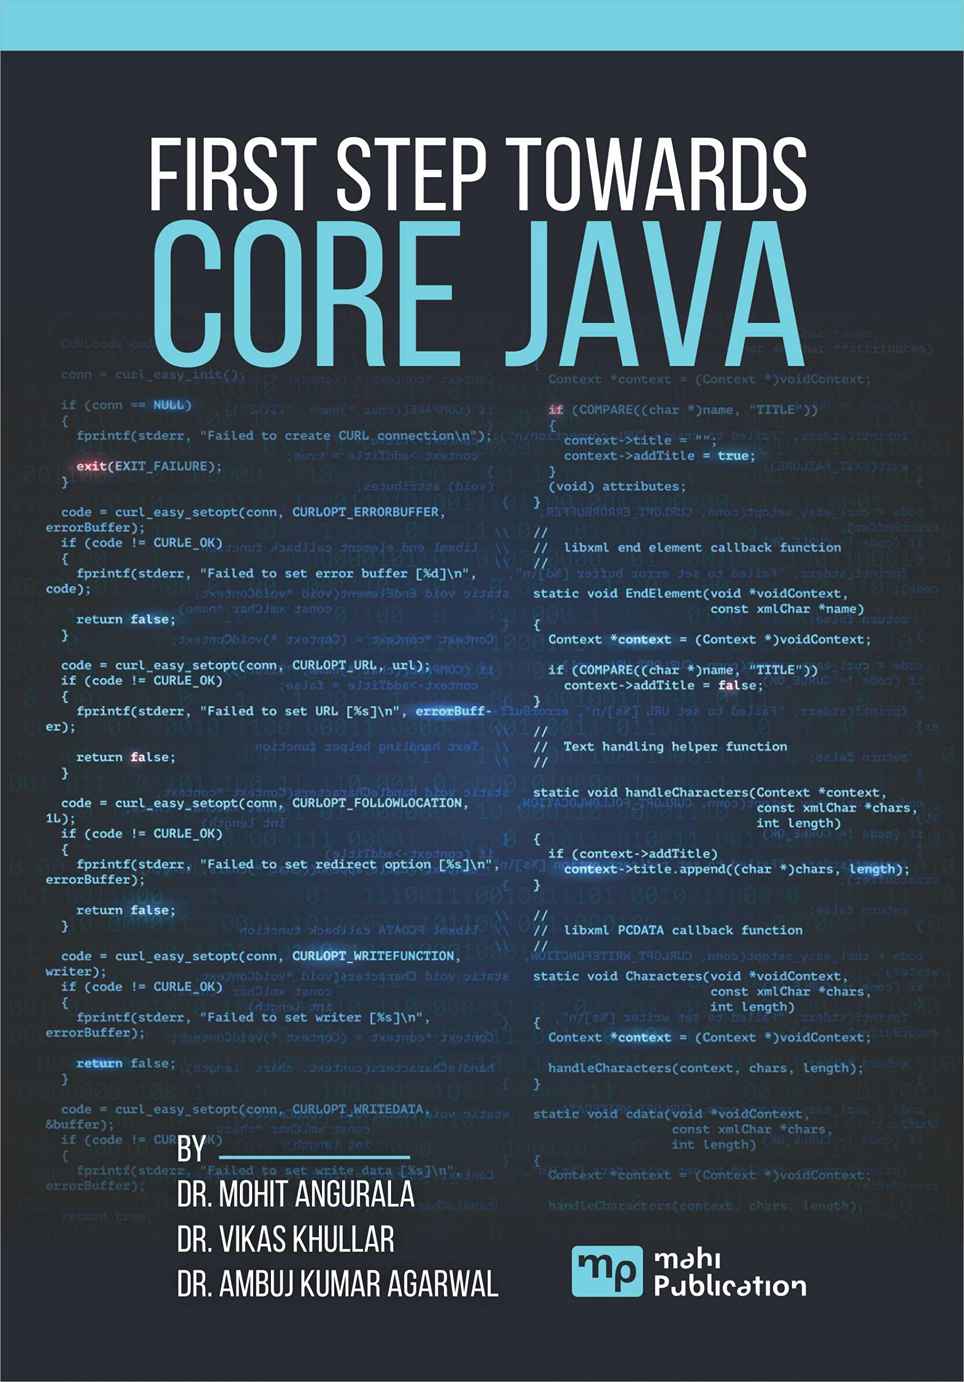 First Step Towards Core Java